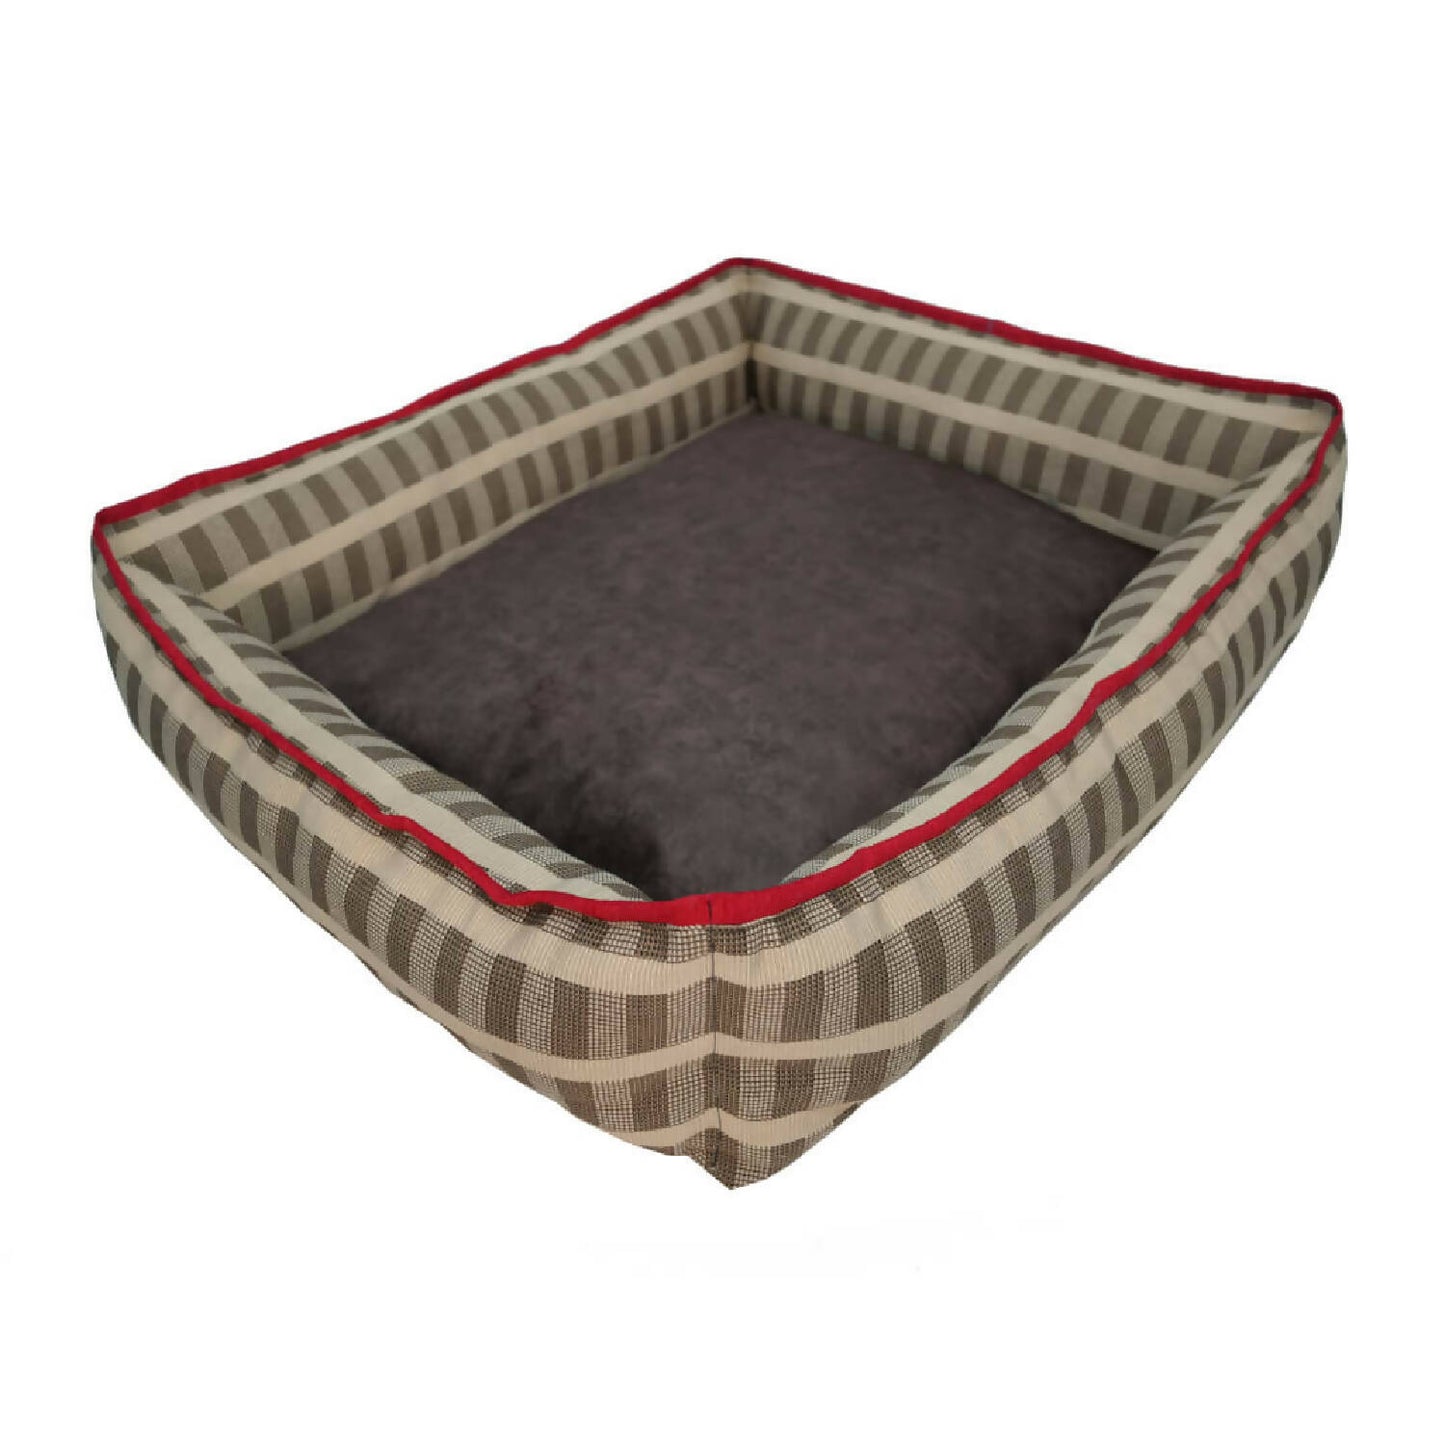 House of Furry - Bolster 100% Cotton Bolster Bed for Dogs & Cats